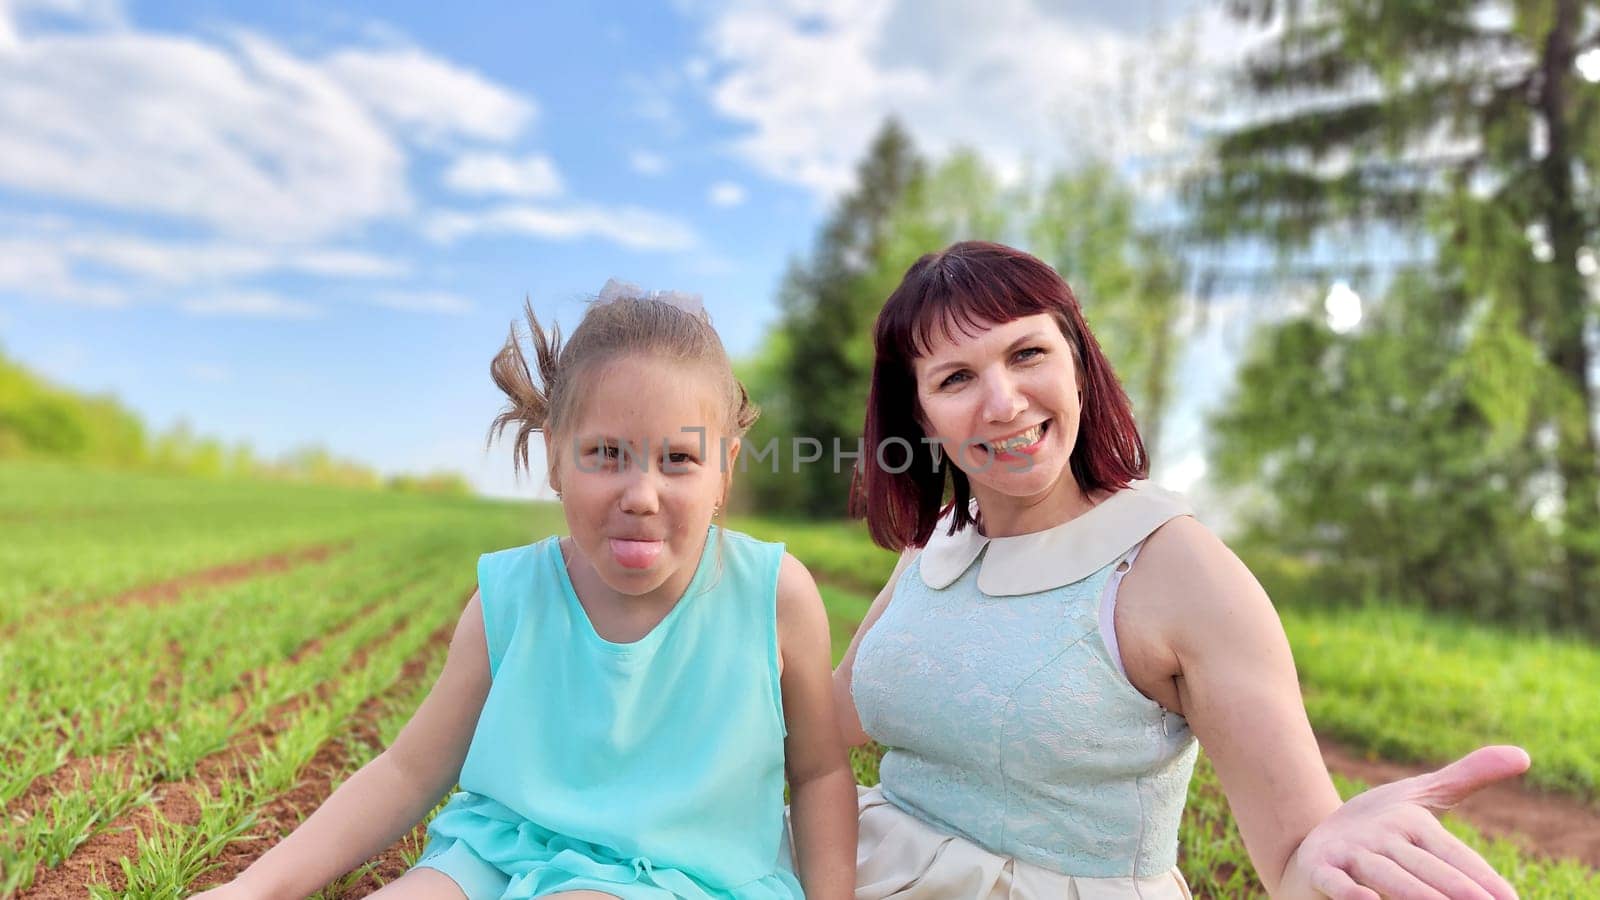 Happy mother and daughter enjoying rest, playing and fun on nature in green field. Woman and girl resting outdoors in summer or spring day